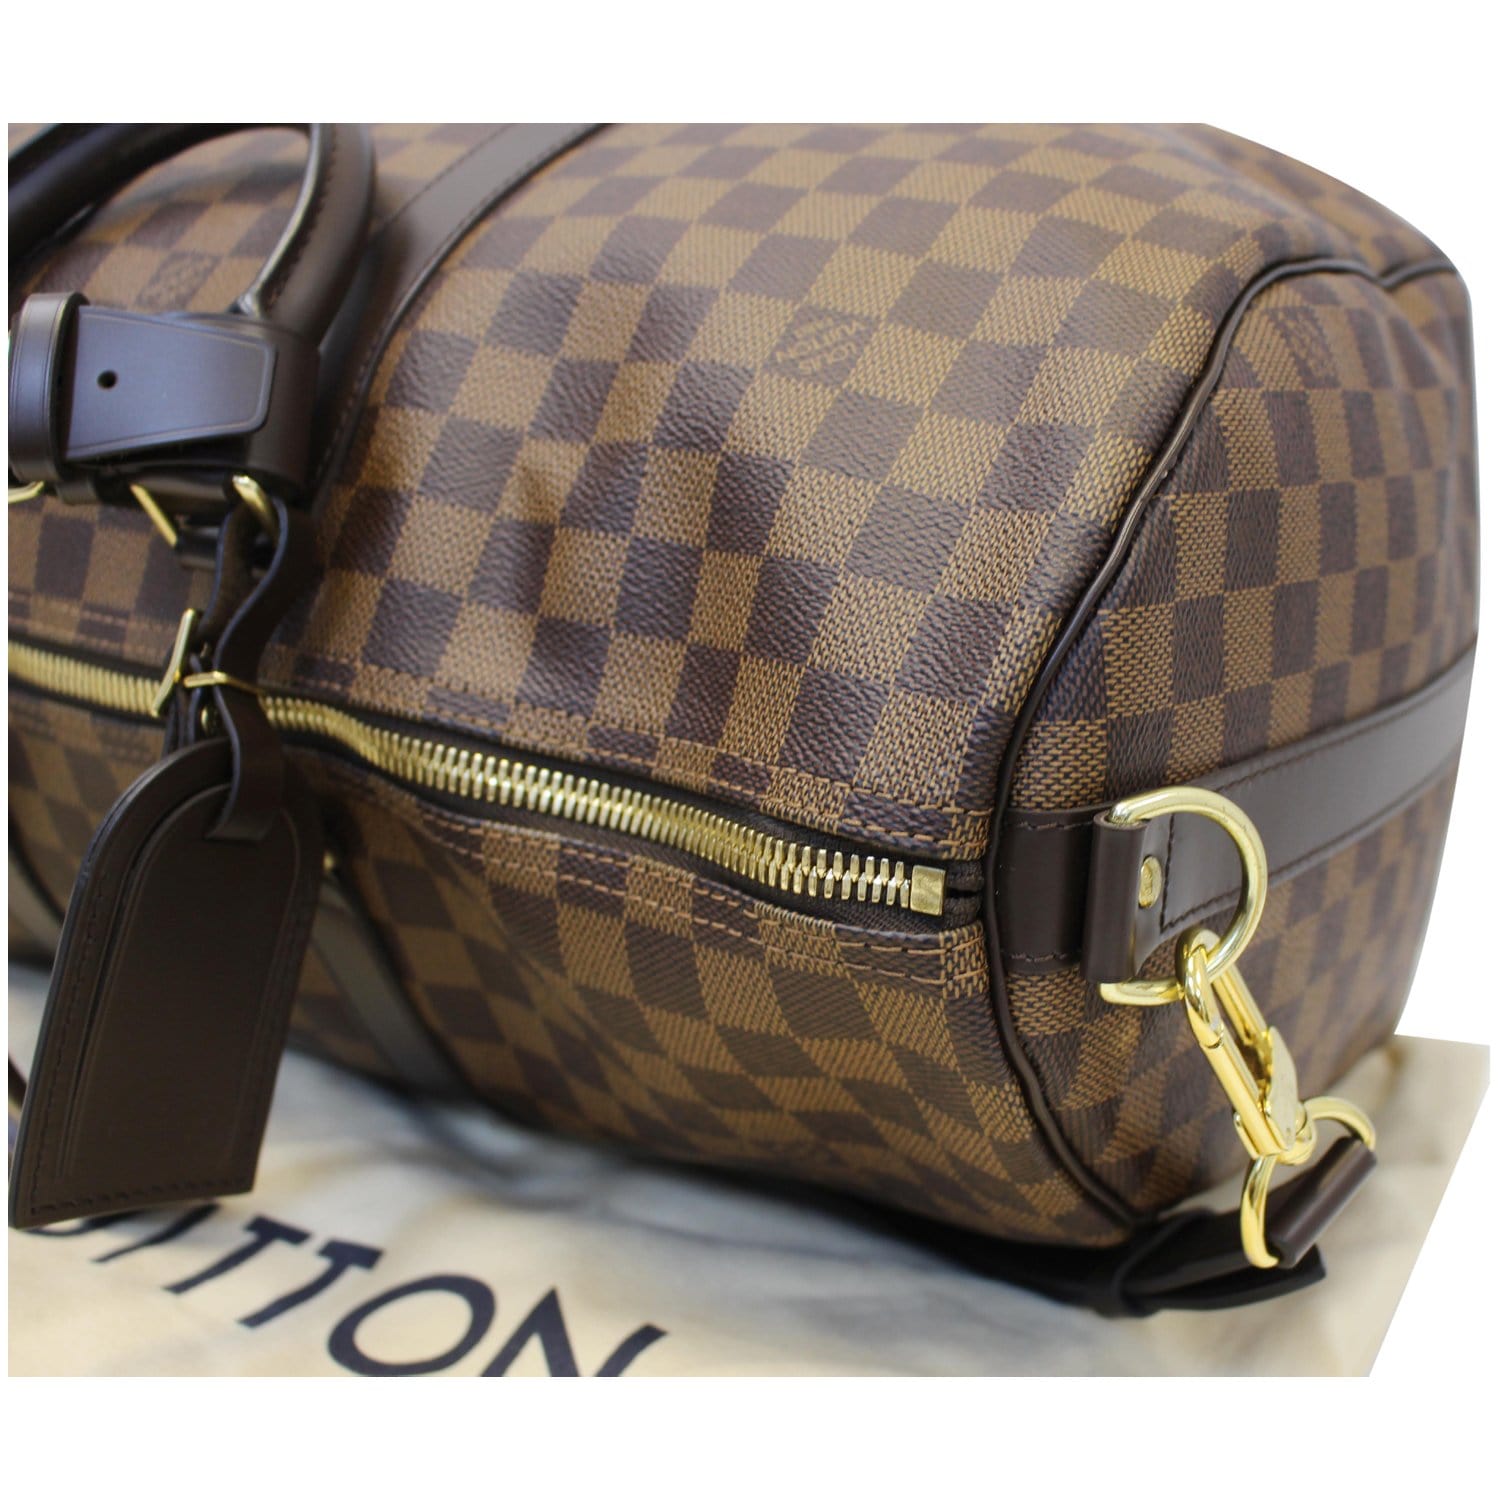 Keepall 45 Bandoulière, Used & Preloved Louis Vuitton Travel Bag, LXR USA, Brown